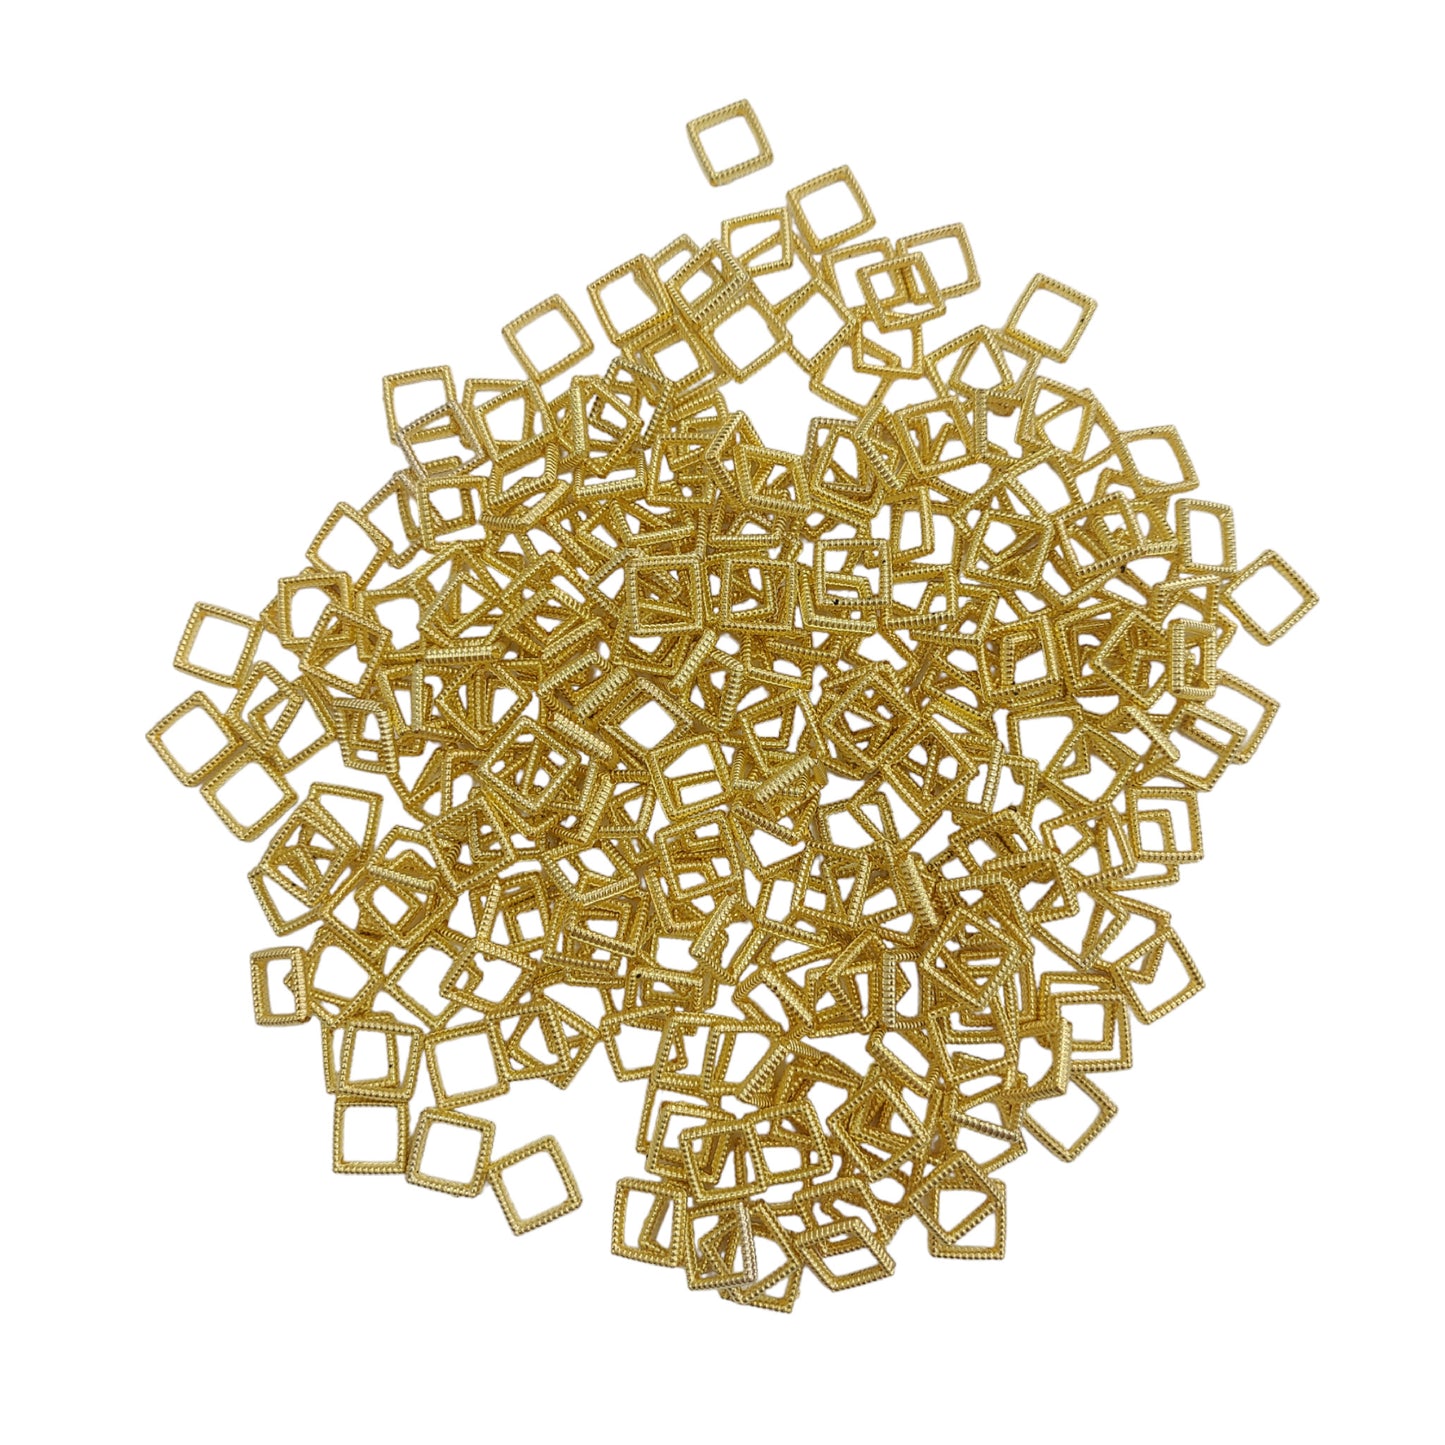 CCB Square Shape Motifs: Perfect for Crafting, Decor, and Jewelry Making - 12mm & 22mm 